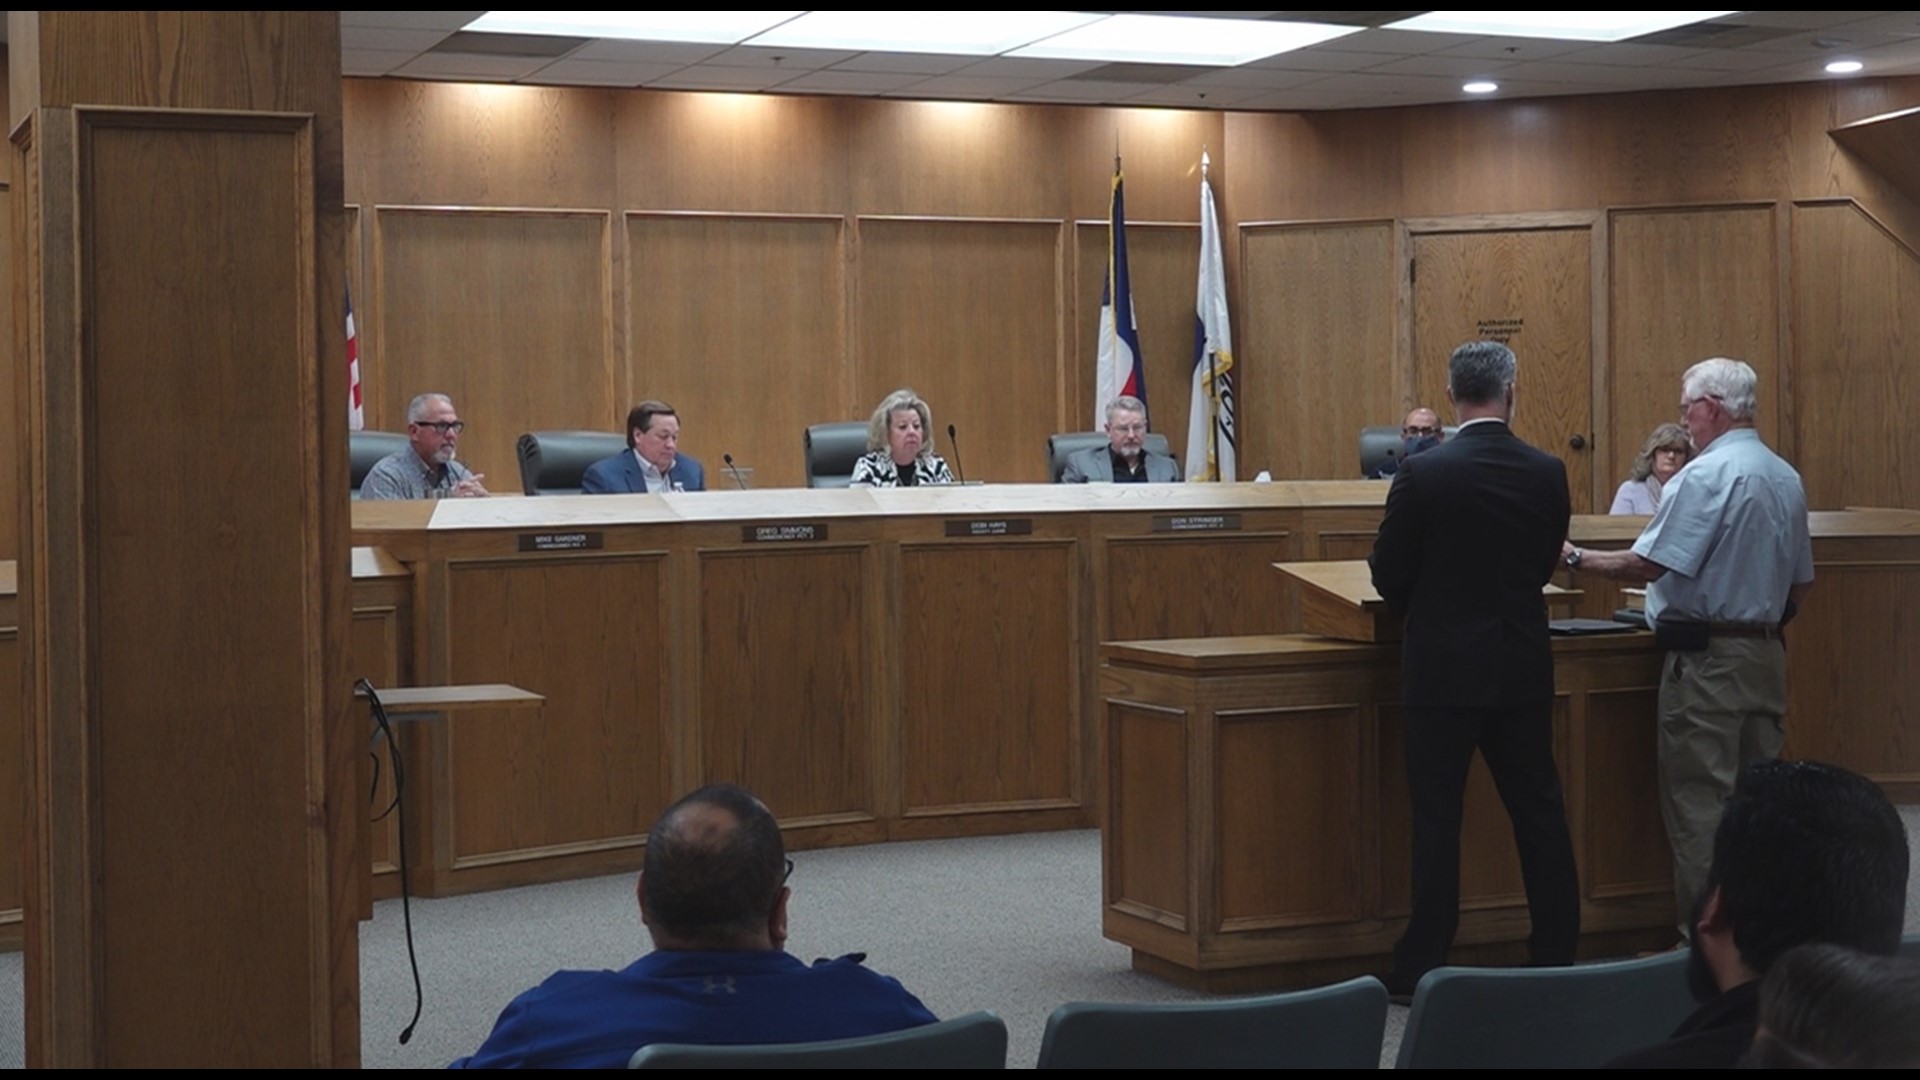 A company that conducts autopsies made a presentation to the Ector County Commissioners Court to see if the county would consider creating its own forensic center.